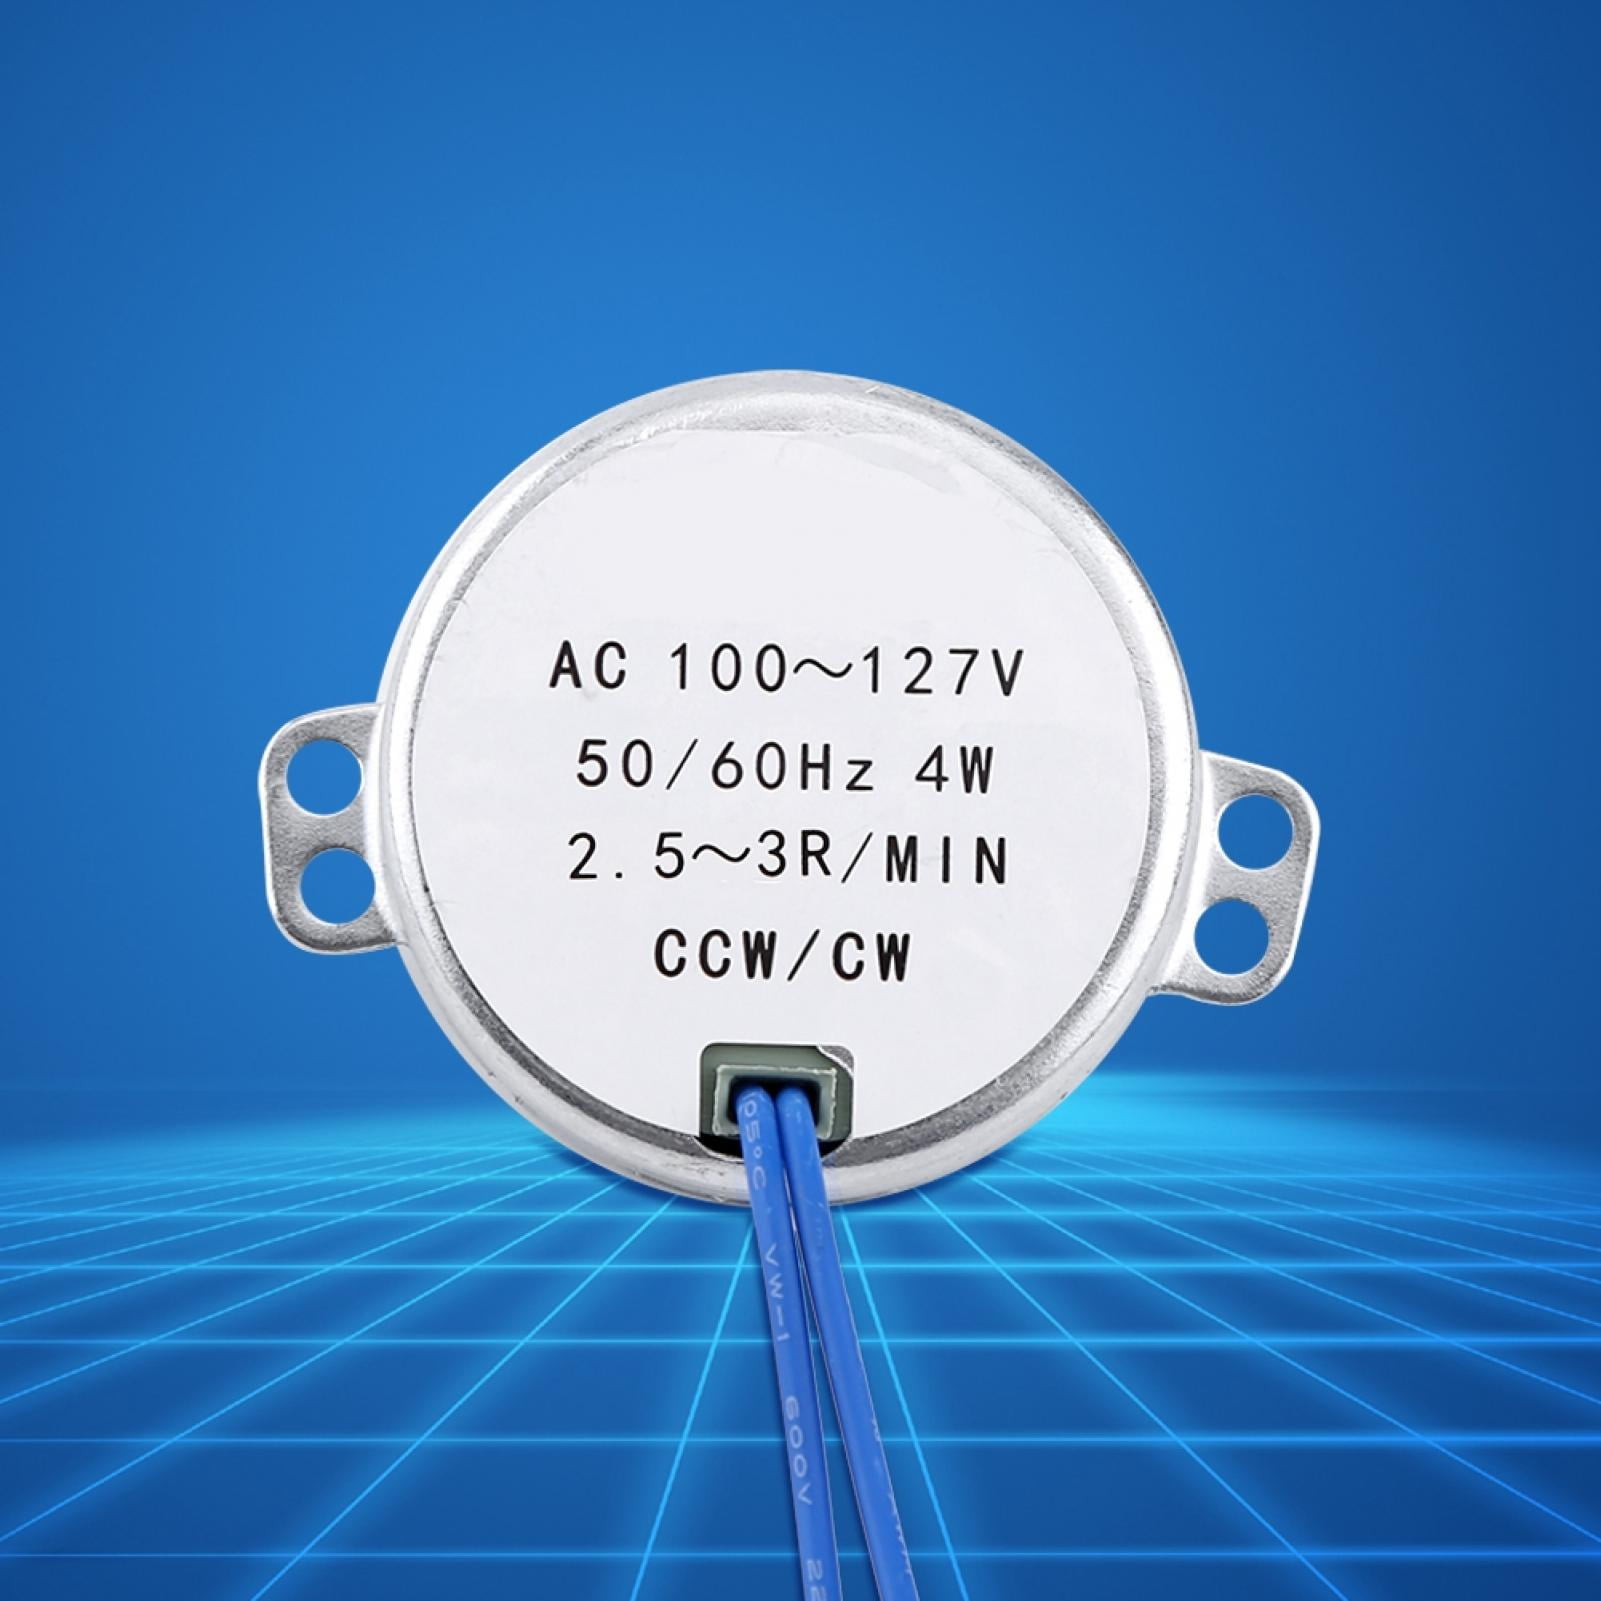 Details about   50/60Hz AC 100-127V 4W 2.5-3RPM Synchronous Motor 50/60Hz CCW/CW Geared Motor US 